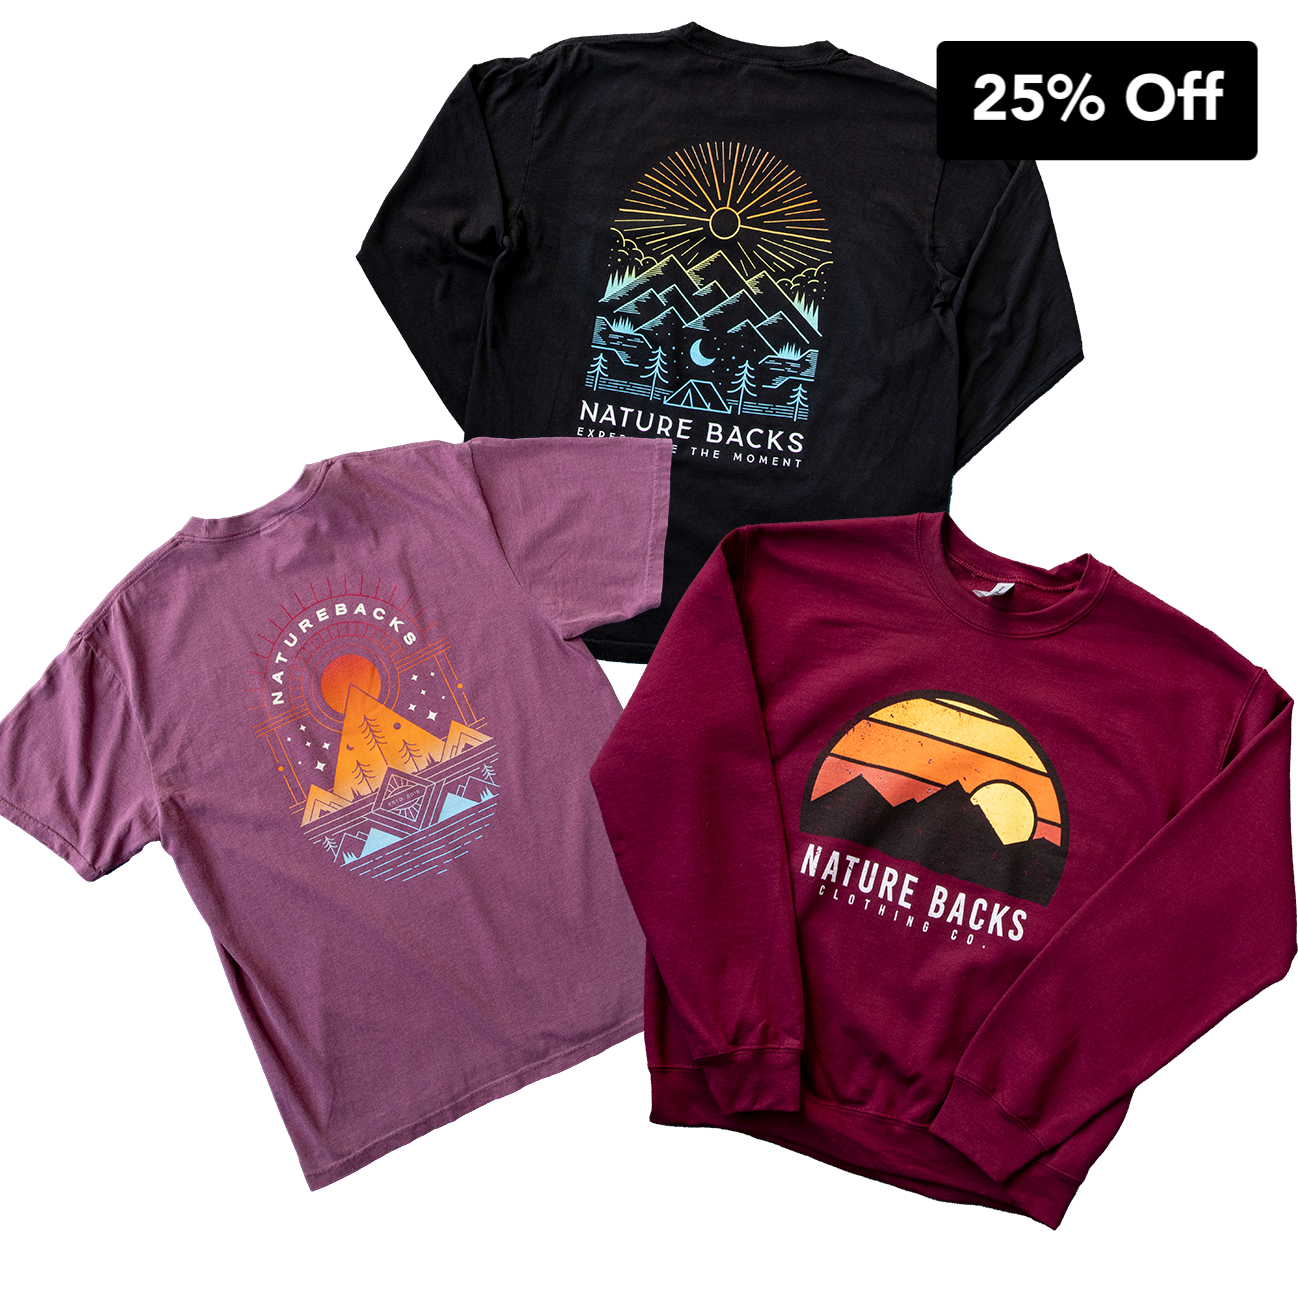 Nature Backs Comfort Color Short Sleeve - Long Sleeve - Comfort Wash Bundle | 1 Short Sleeve, Long Sleeve, and Crewneck on With Nature-Inspired Designs on Ultra-Soft Fabric 